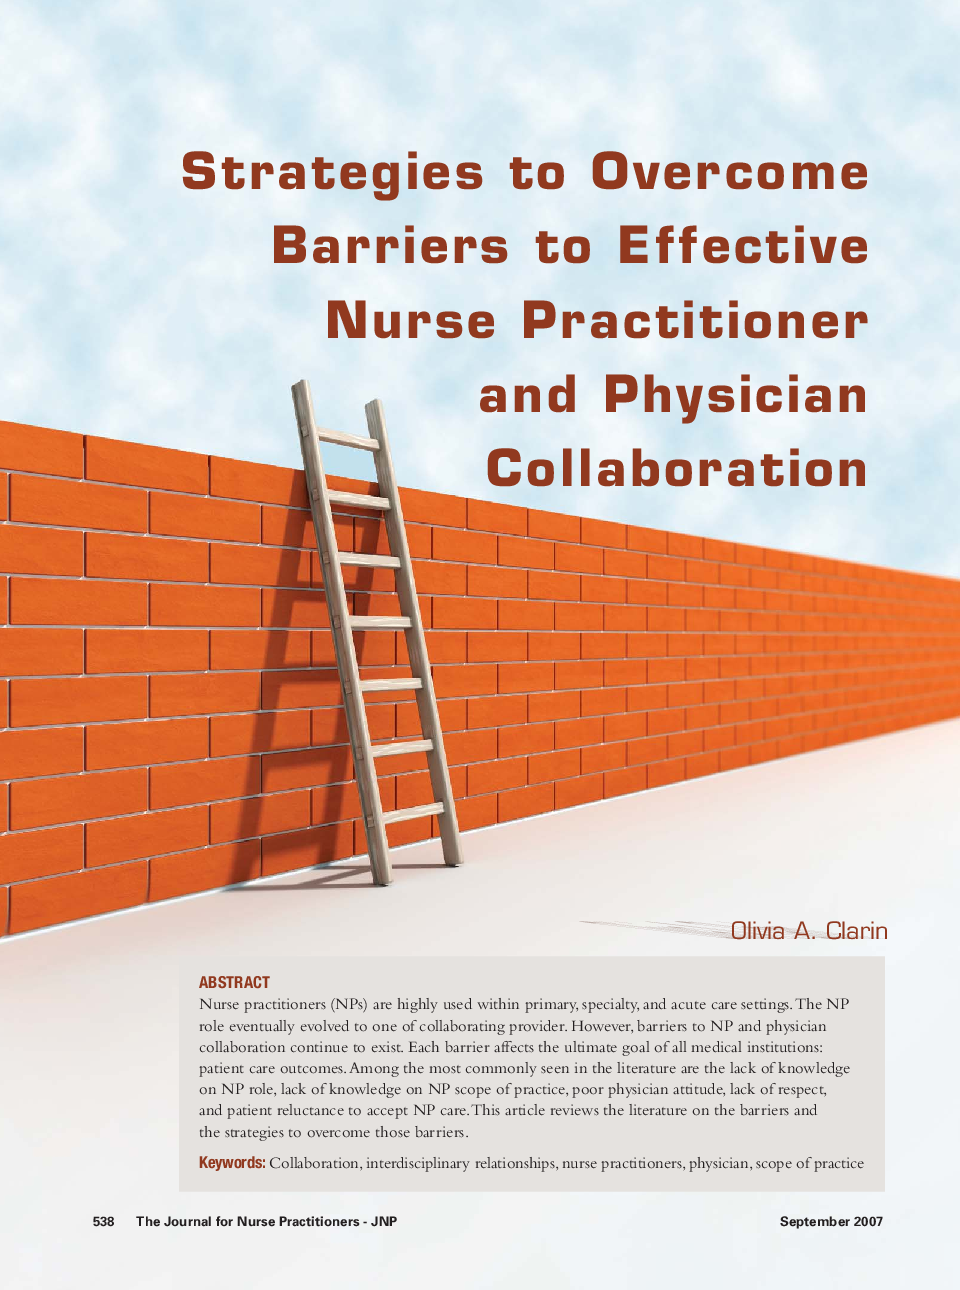 Strategies to Overcome Barriers to Effective Nurse Practitioner and Physician Collaboration 